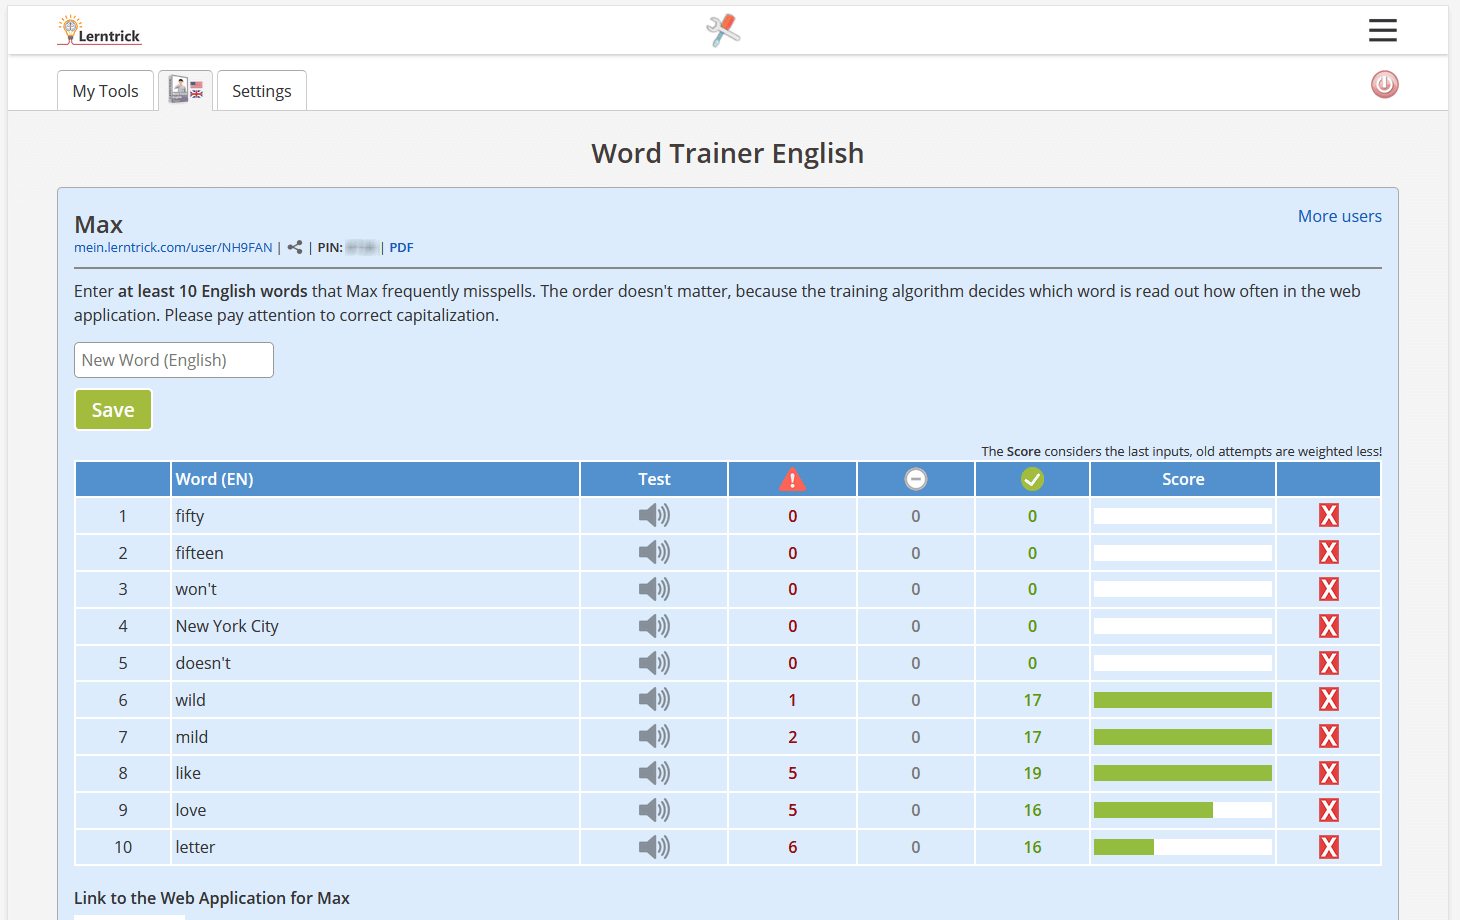 Overview of the word trainer with word list and statistics